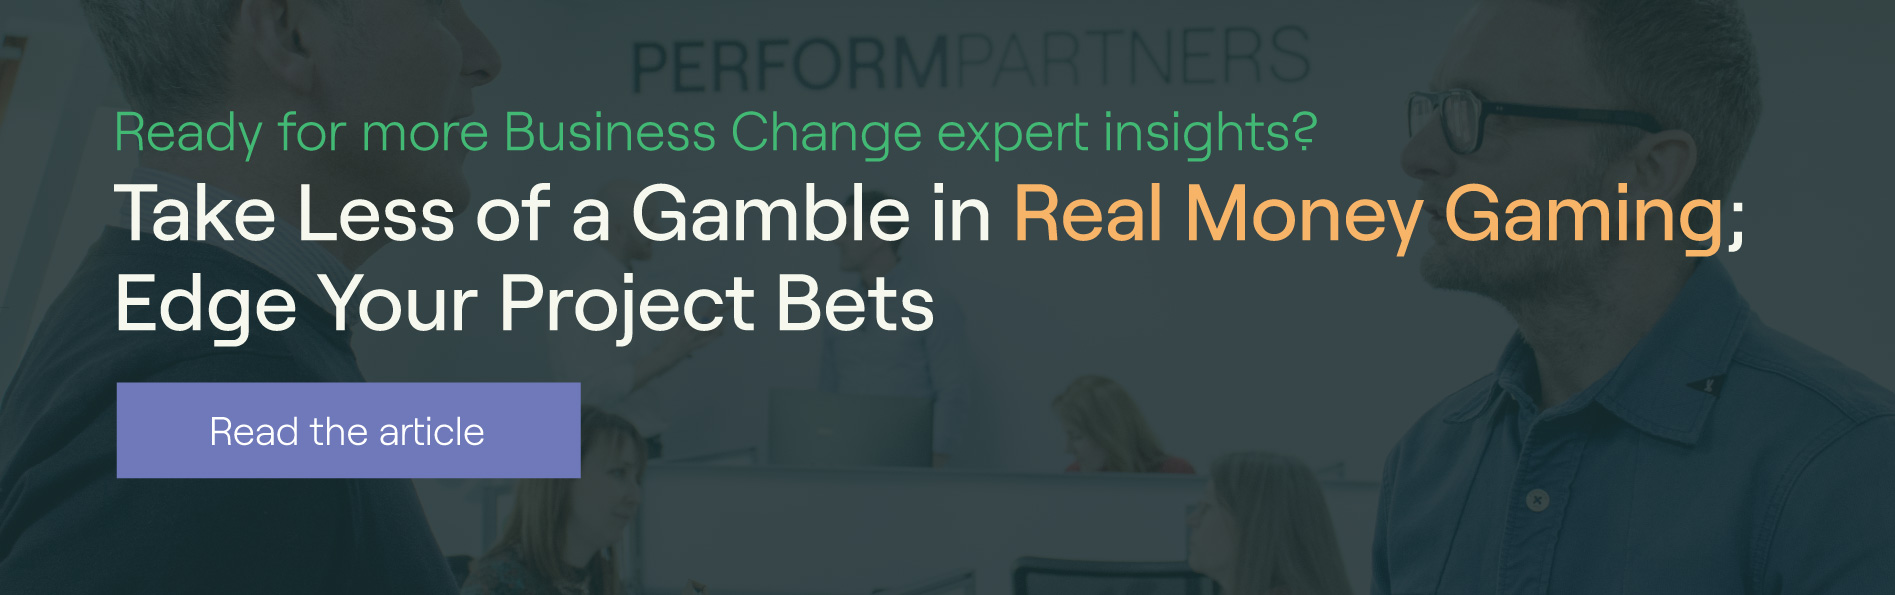 Read the blog: Take Less of a Gamble in Real Money Gaming - Edge your Project Bets